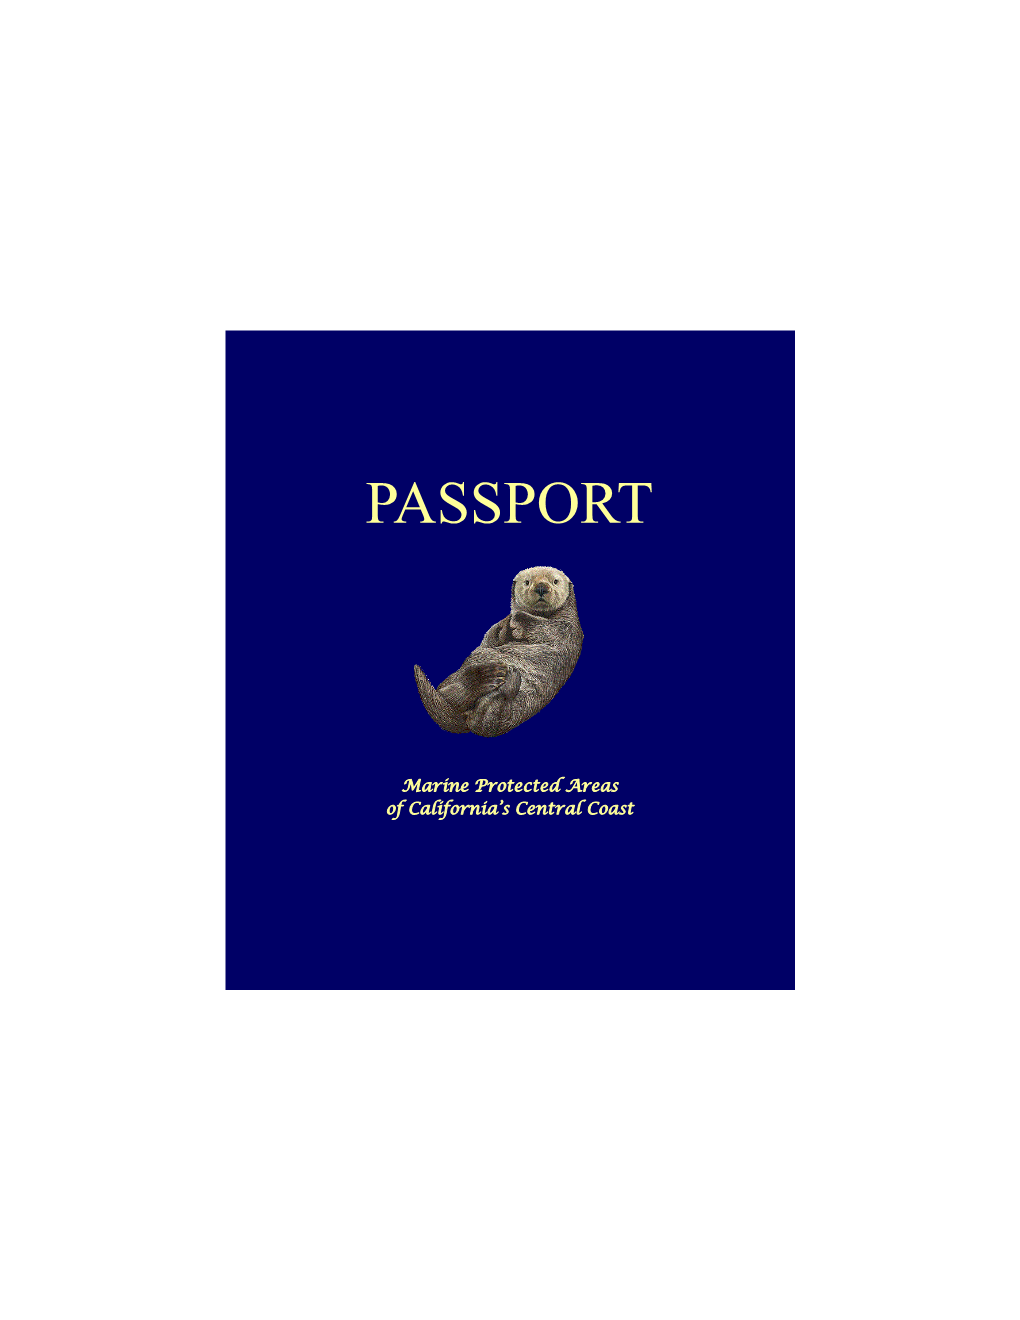 MPA Passport, Which Is Filled with History, Fun Facts, and Many Ways That You Can Enjoy the Coastline